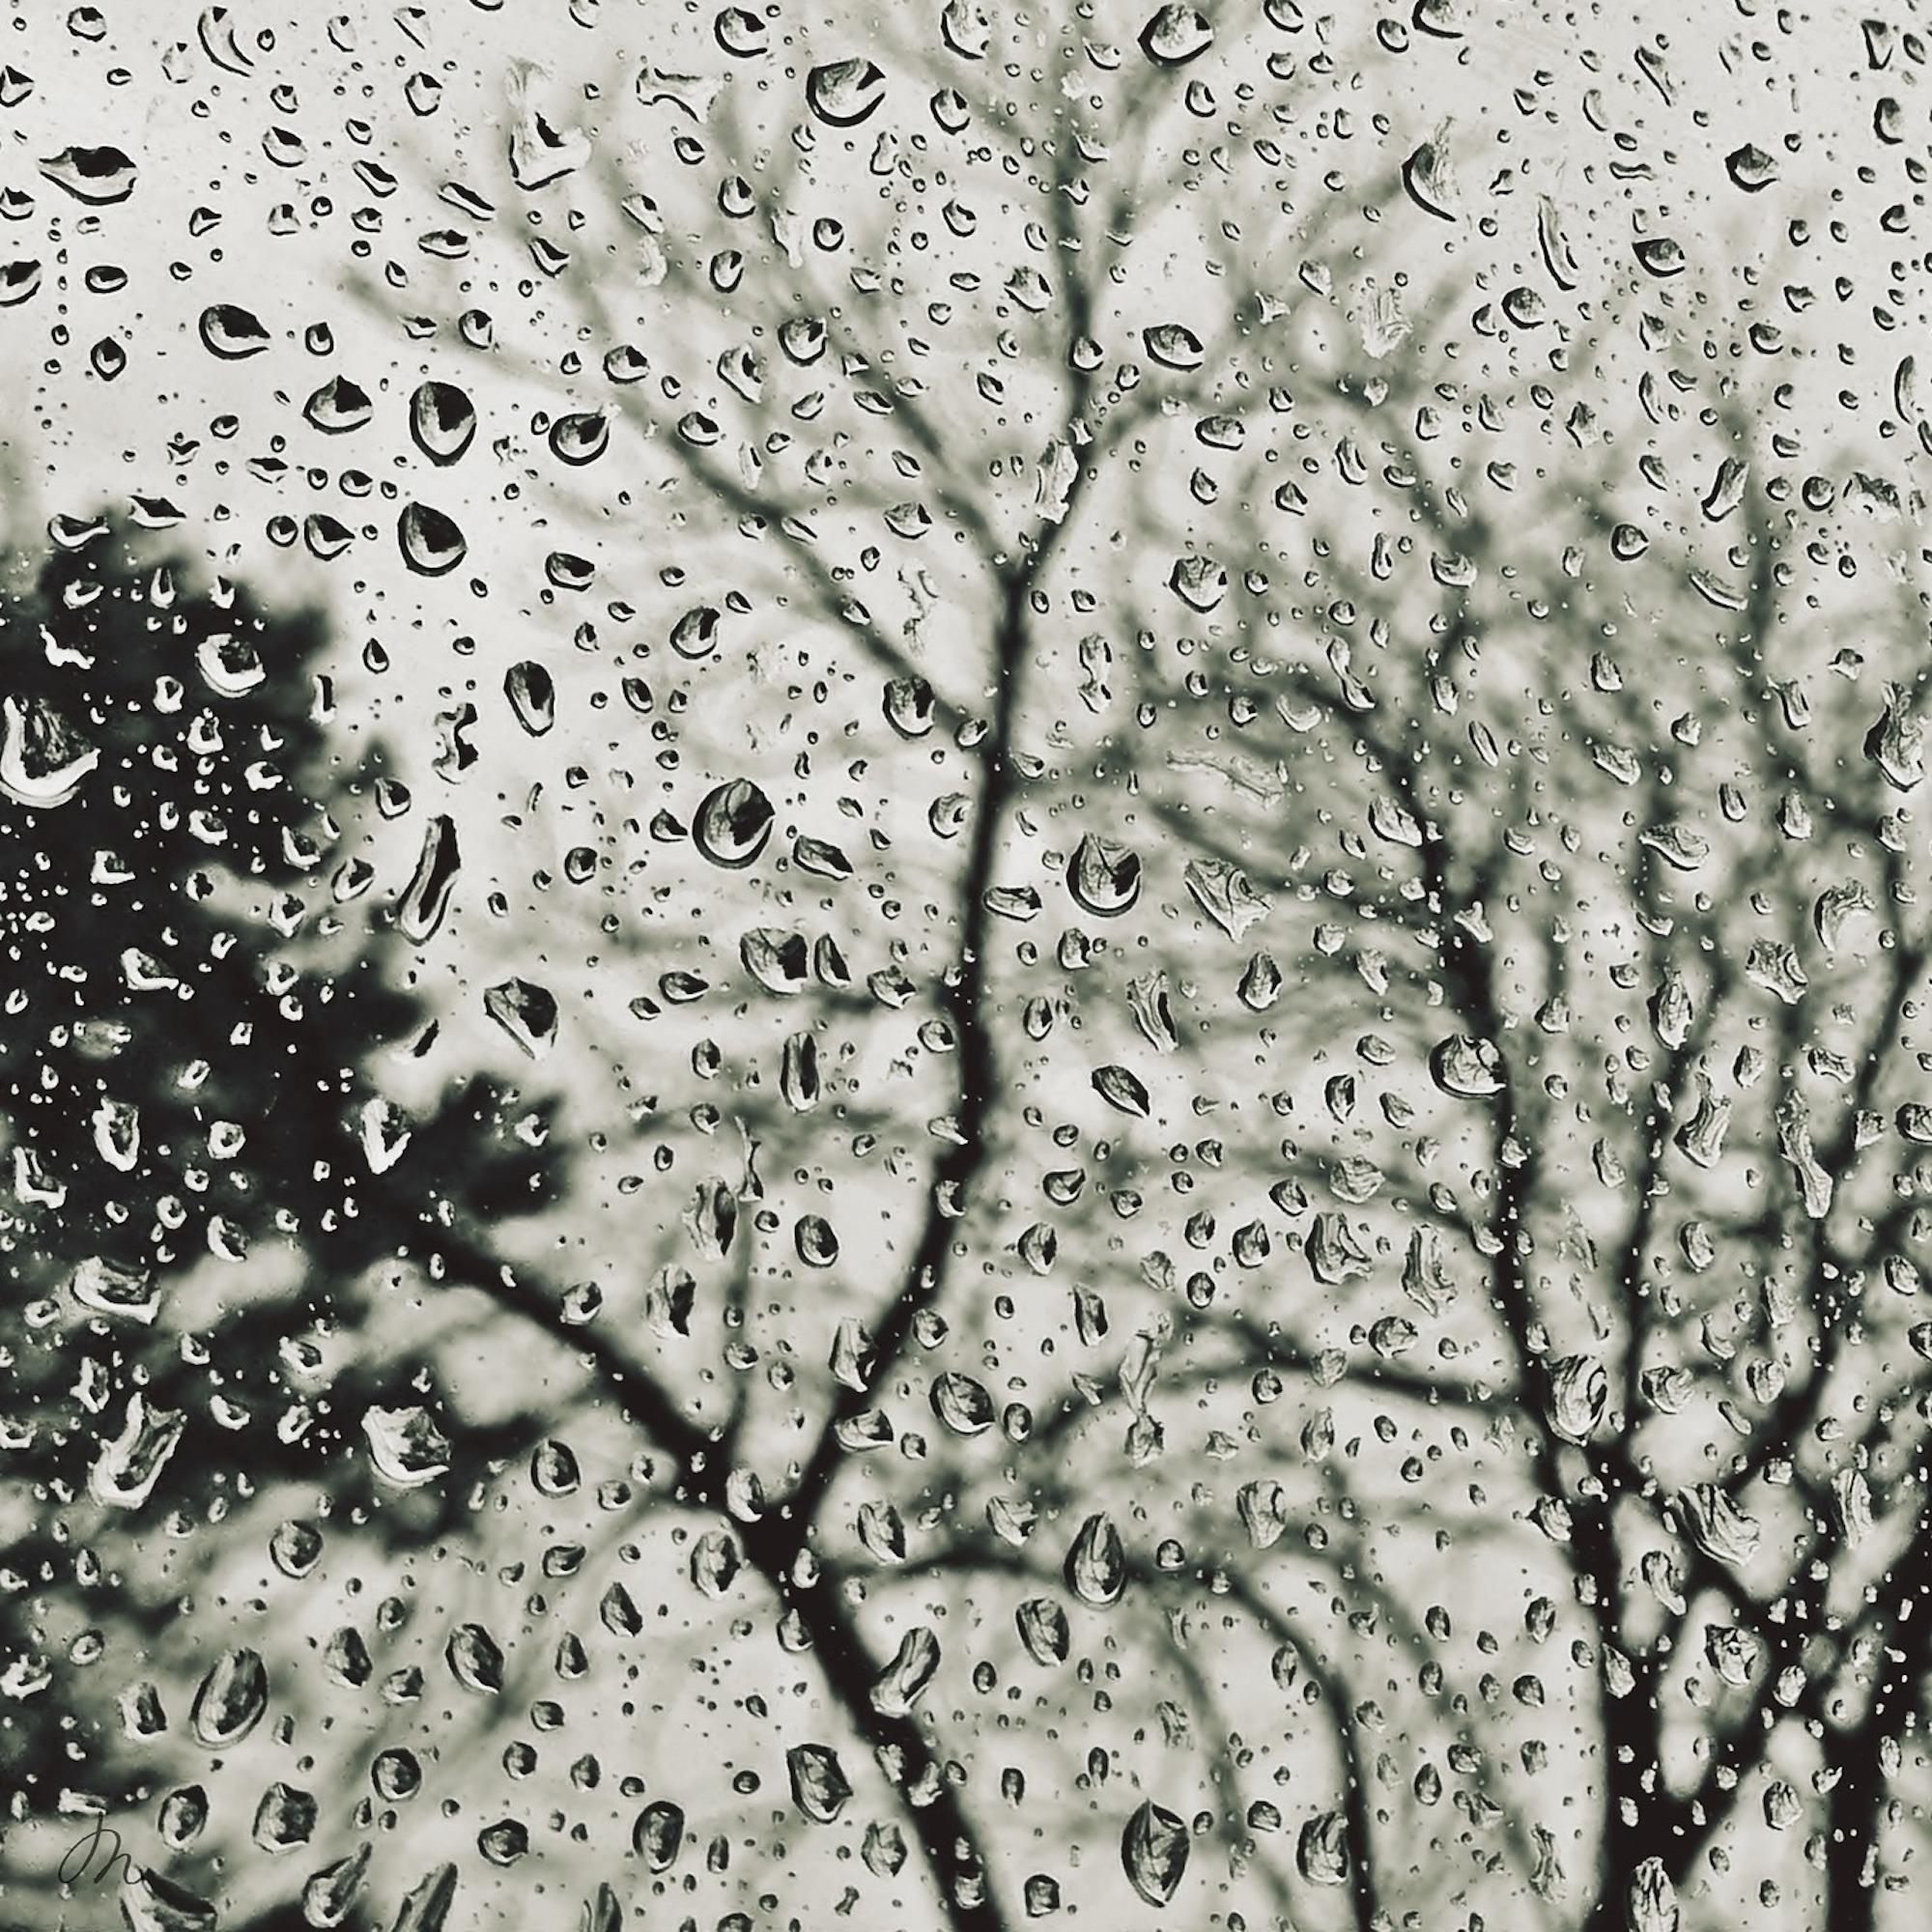 20 Timeless Loopable Rain Sounds to Enjoy and Relax